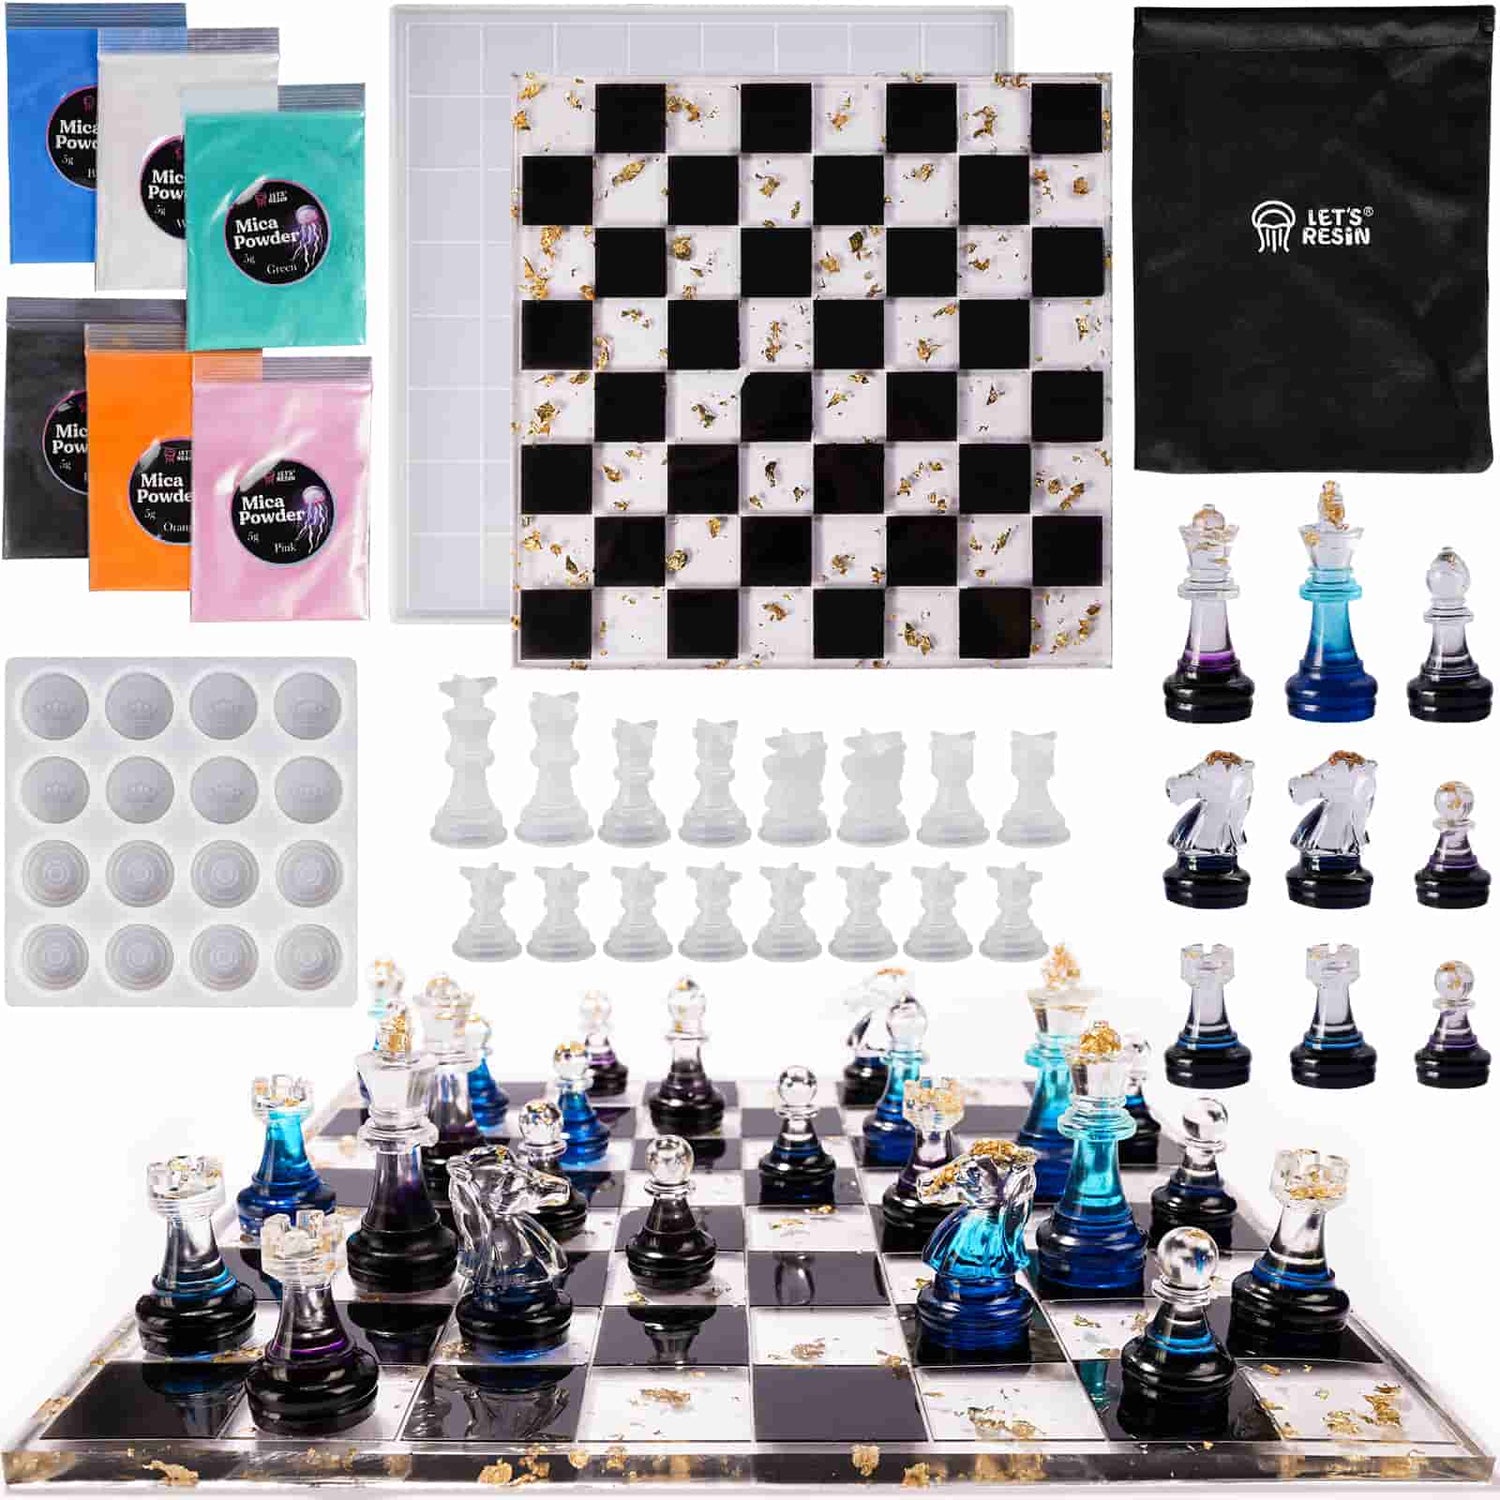 chess moulds To Bake Your Fantasy 